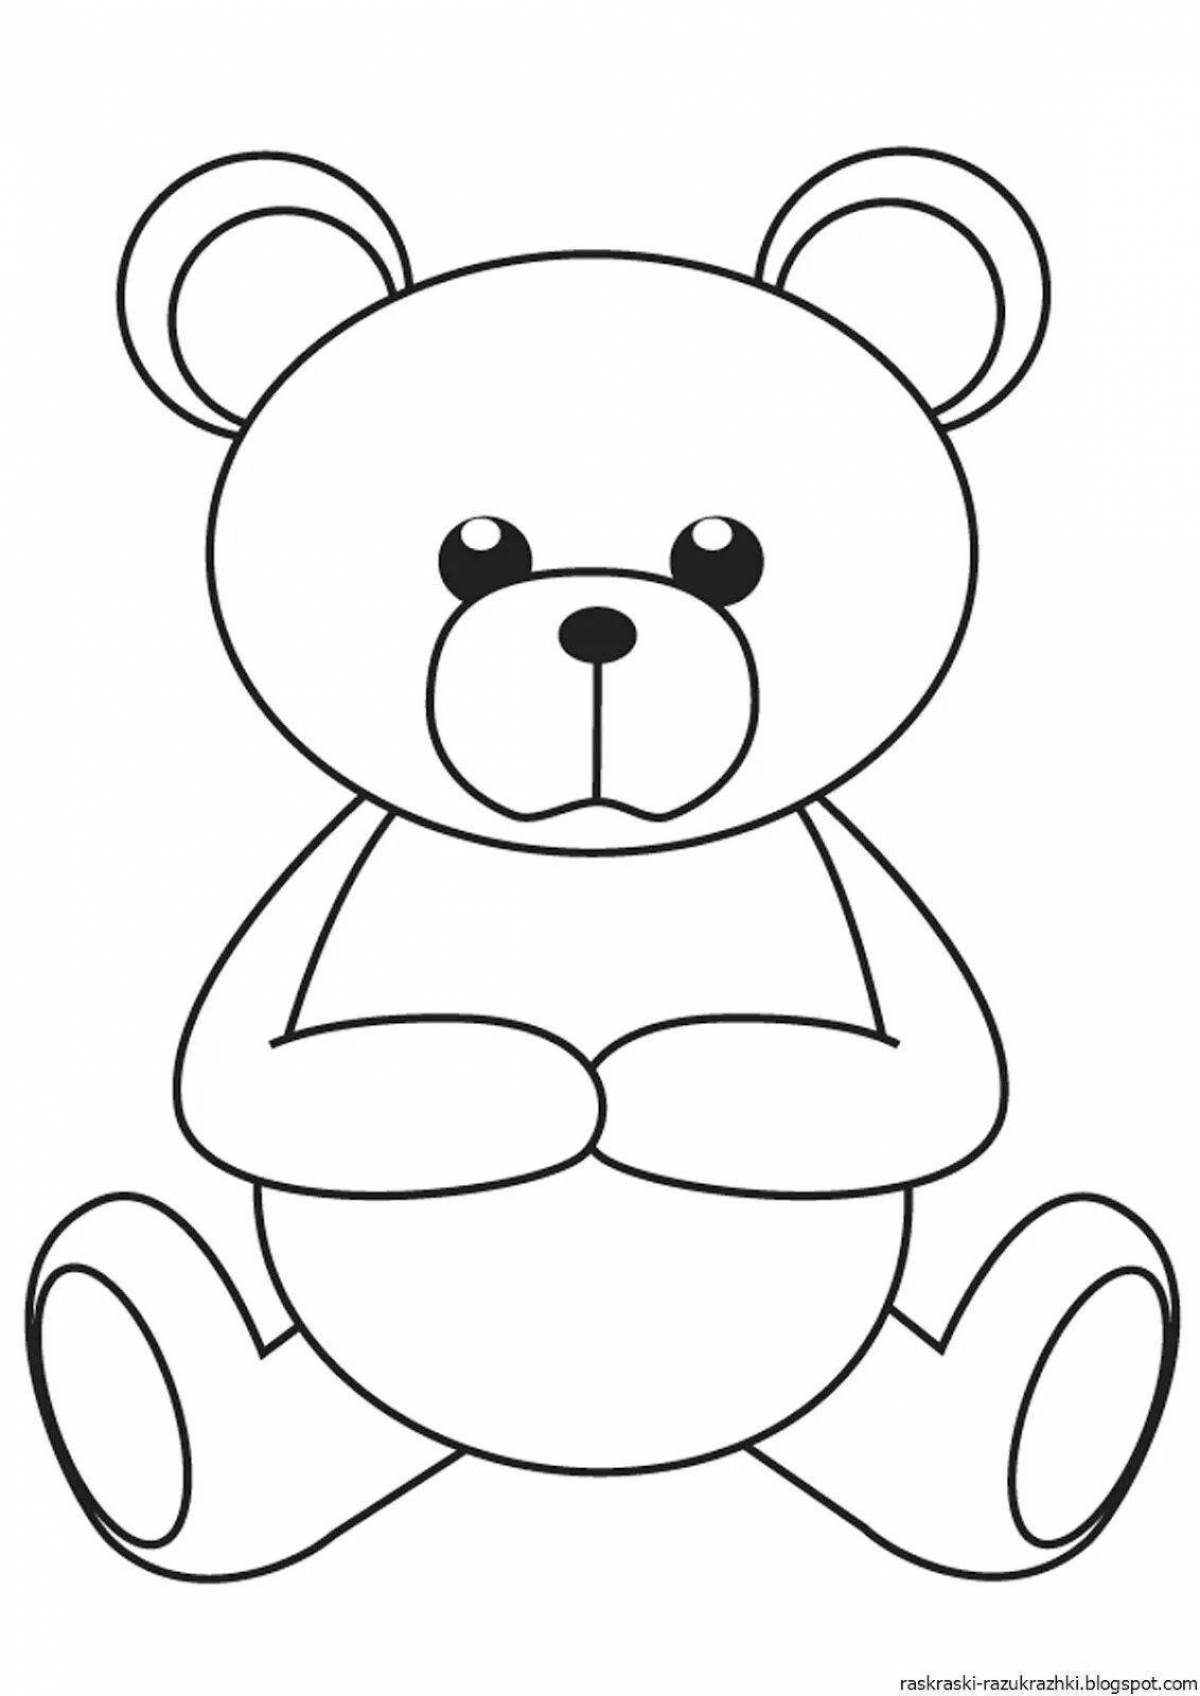 Wonderful bear coloring pages for kids